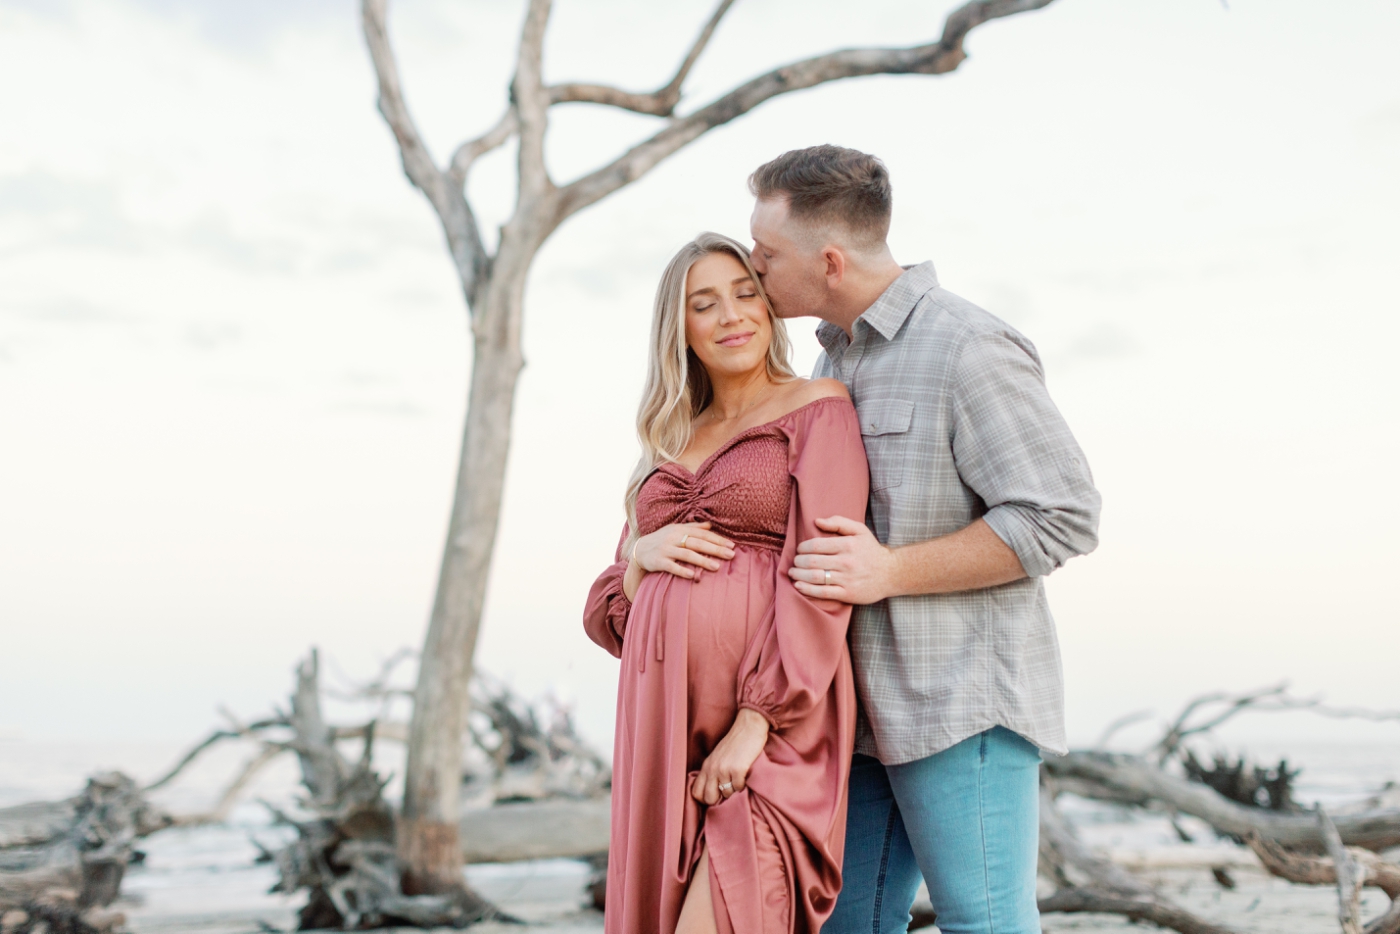 maternity session by Izzy + Co Photography